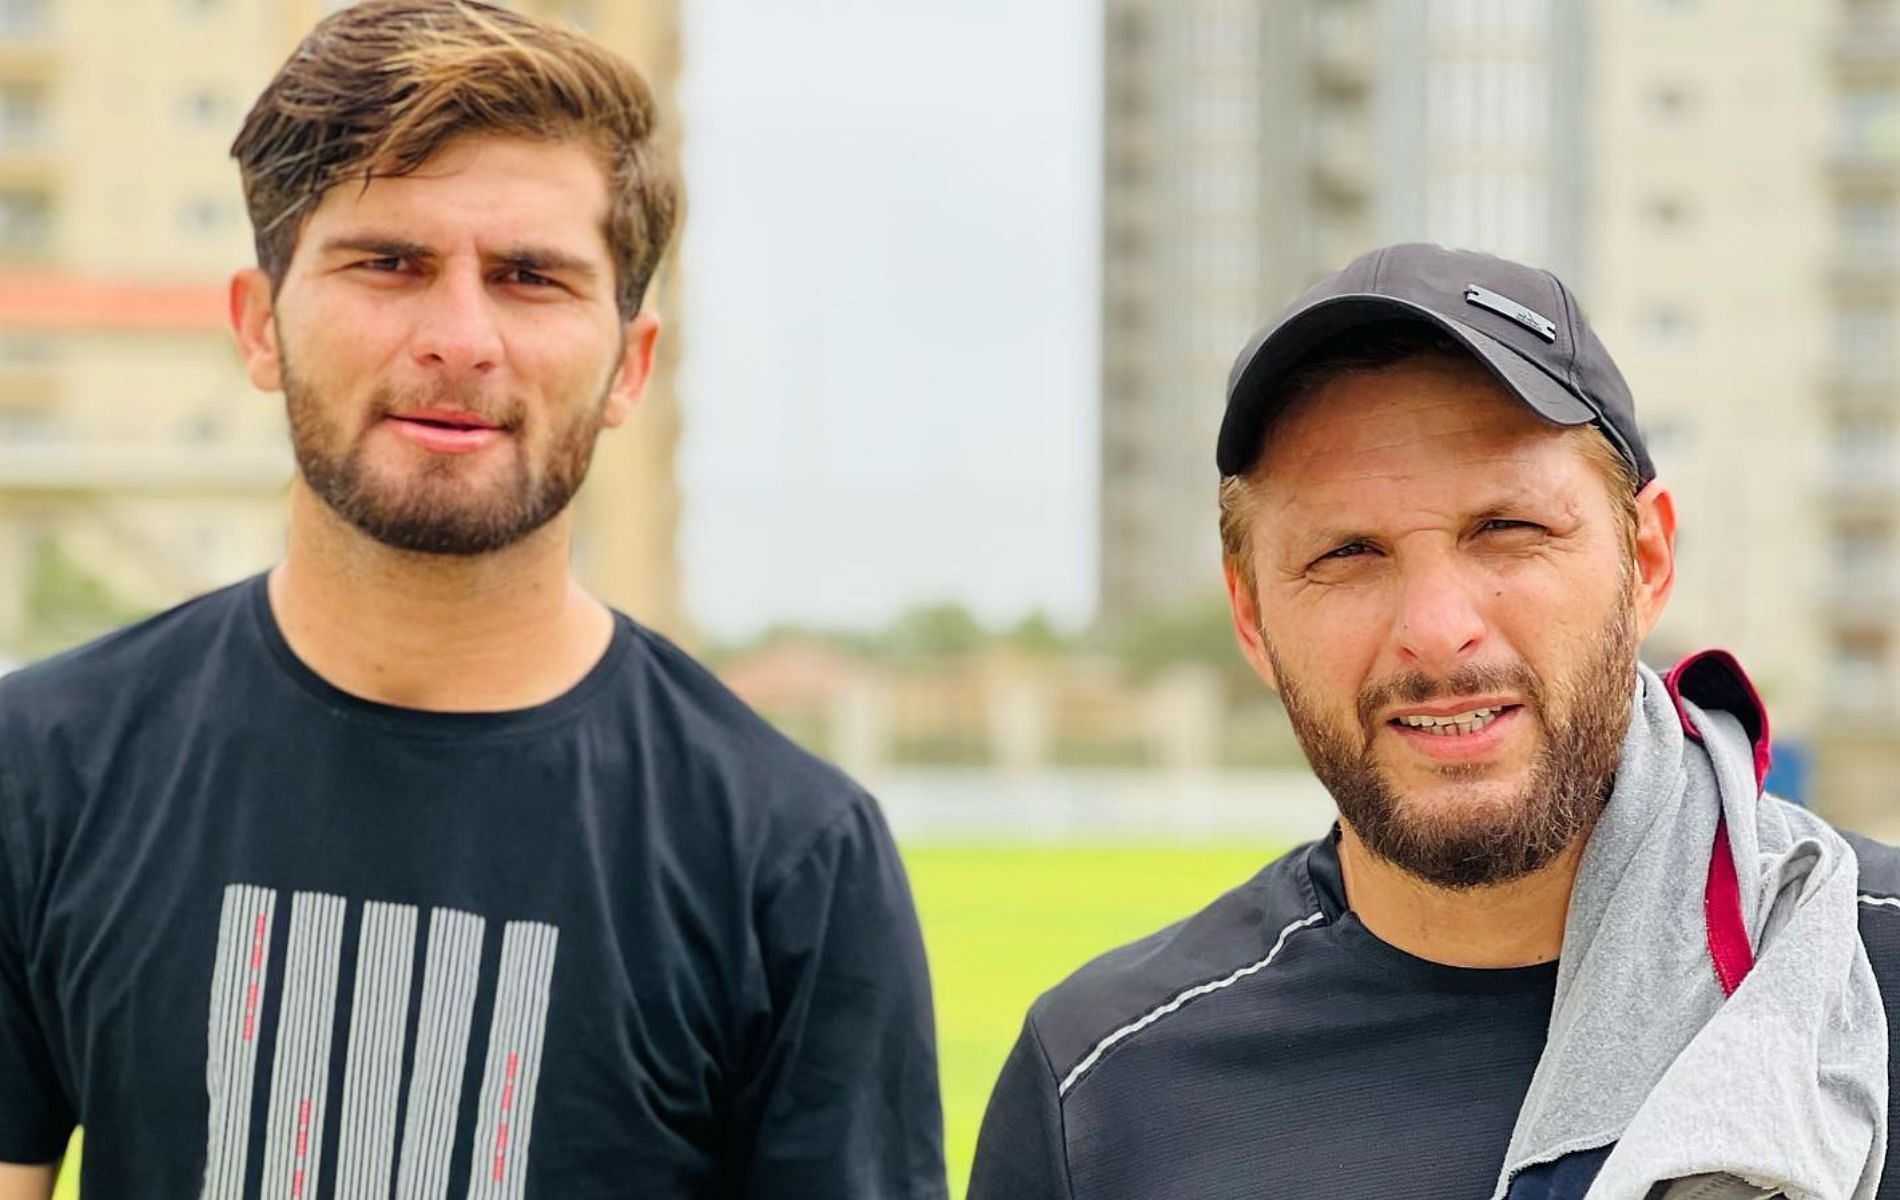 Shaheen Afridi (L) with Shahid Afridi. (Pic: Instagram)